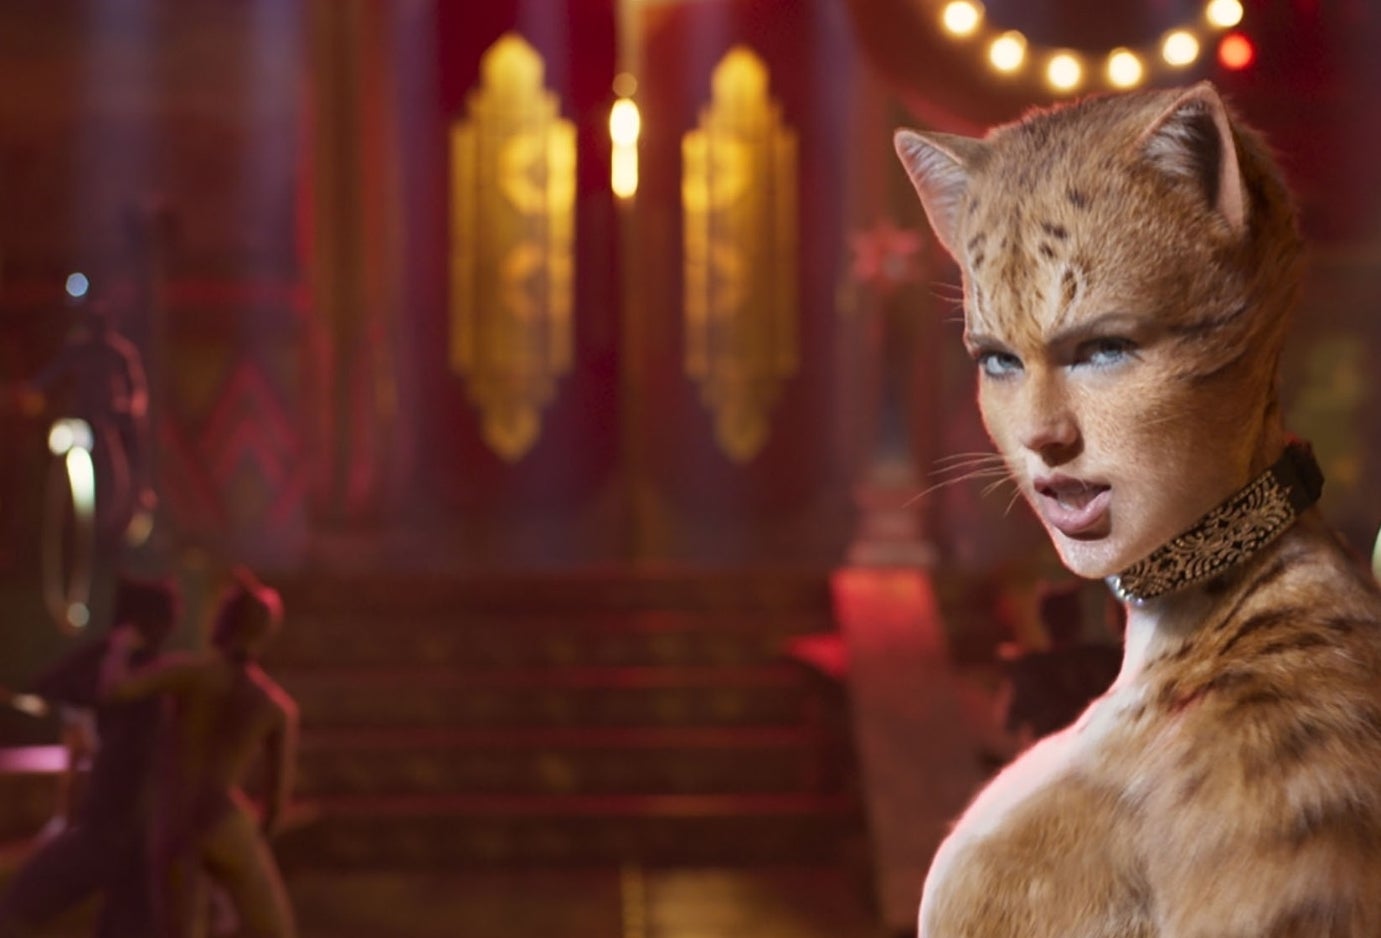 Scene from &#x27;Cats&#x27; with CGI-animated humanoid cat characters in a theatrical setting